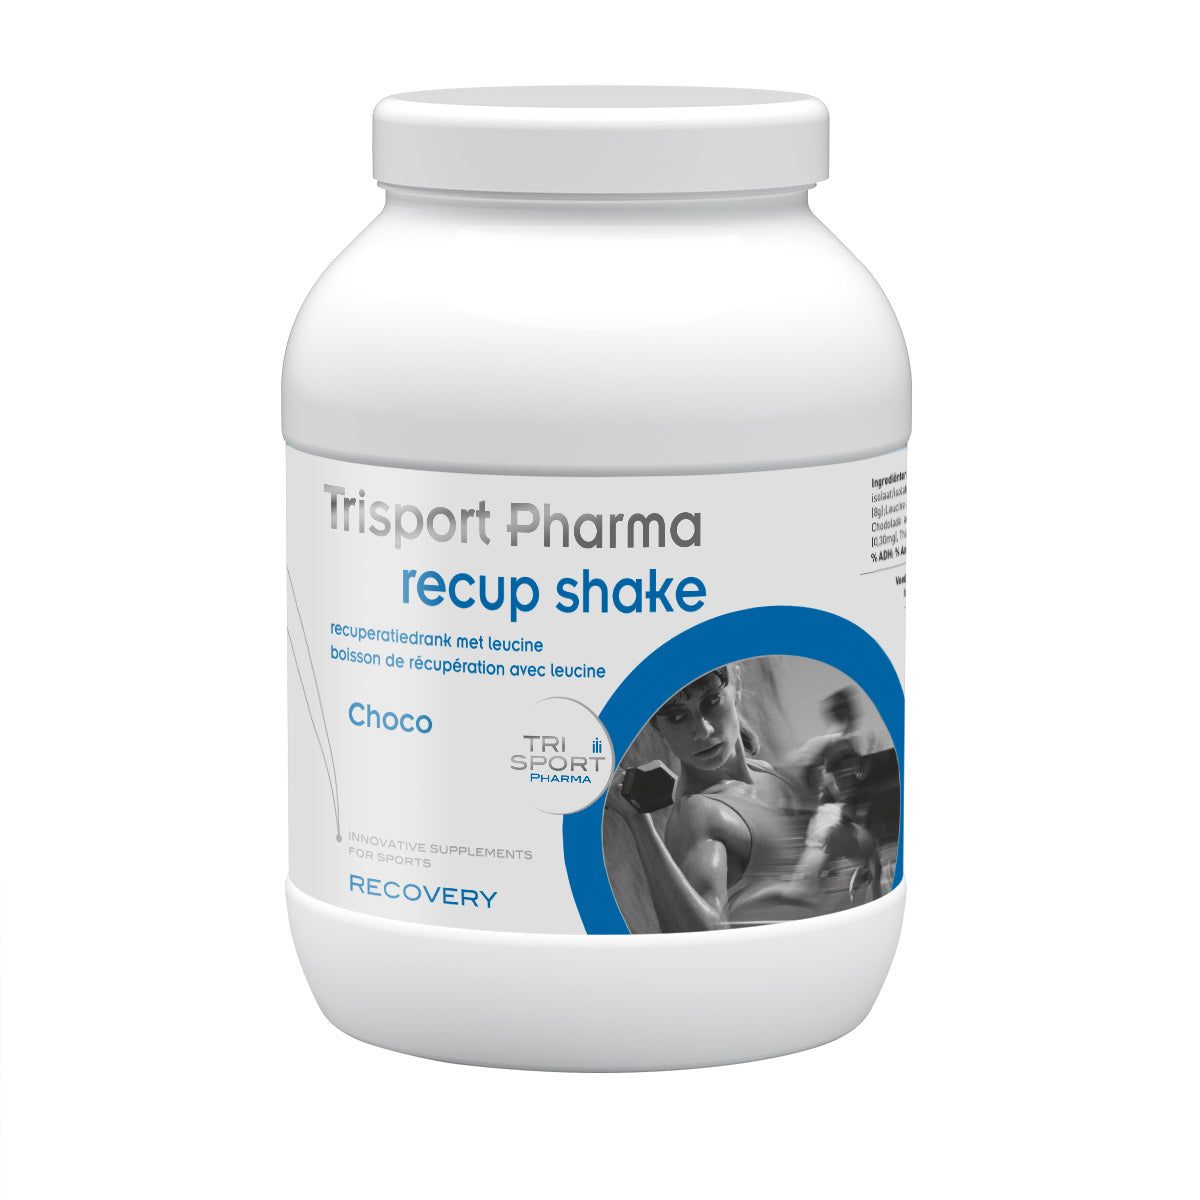 RECUP SHAKE recovery